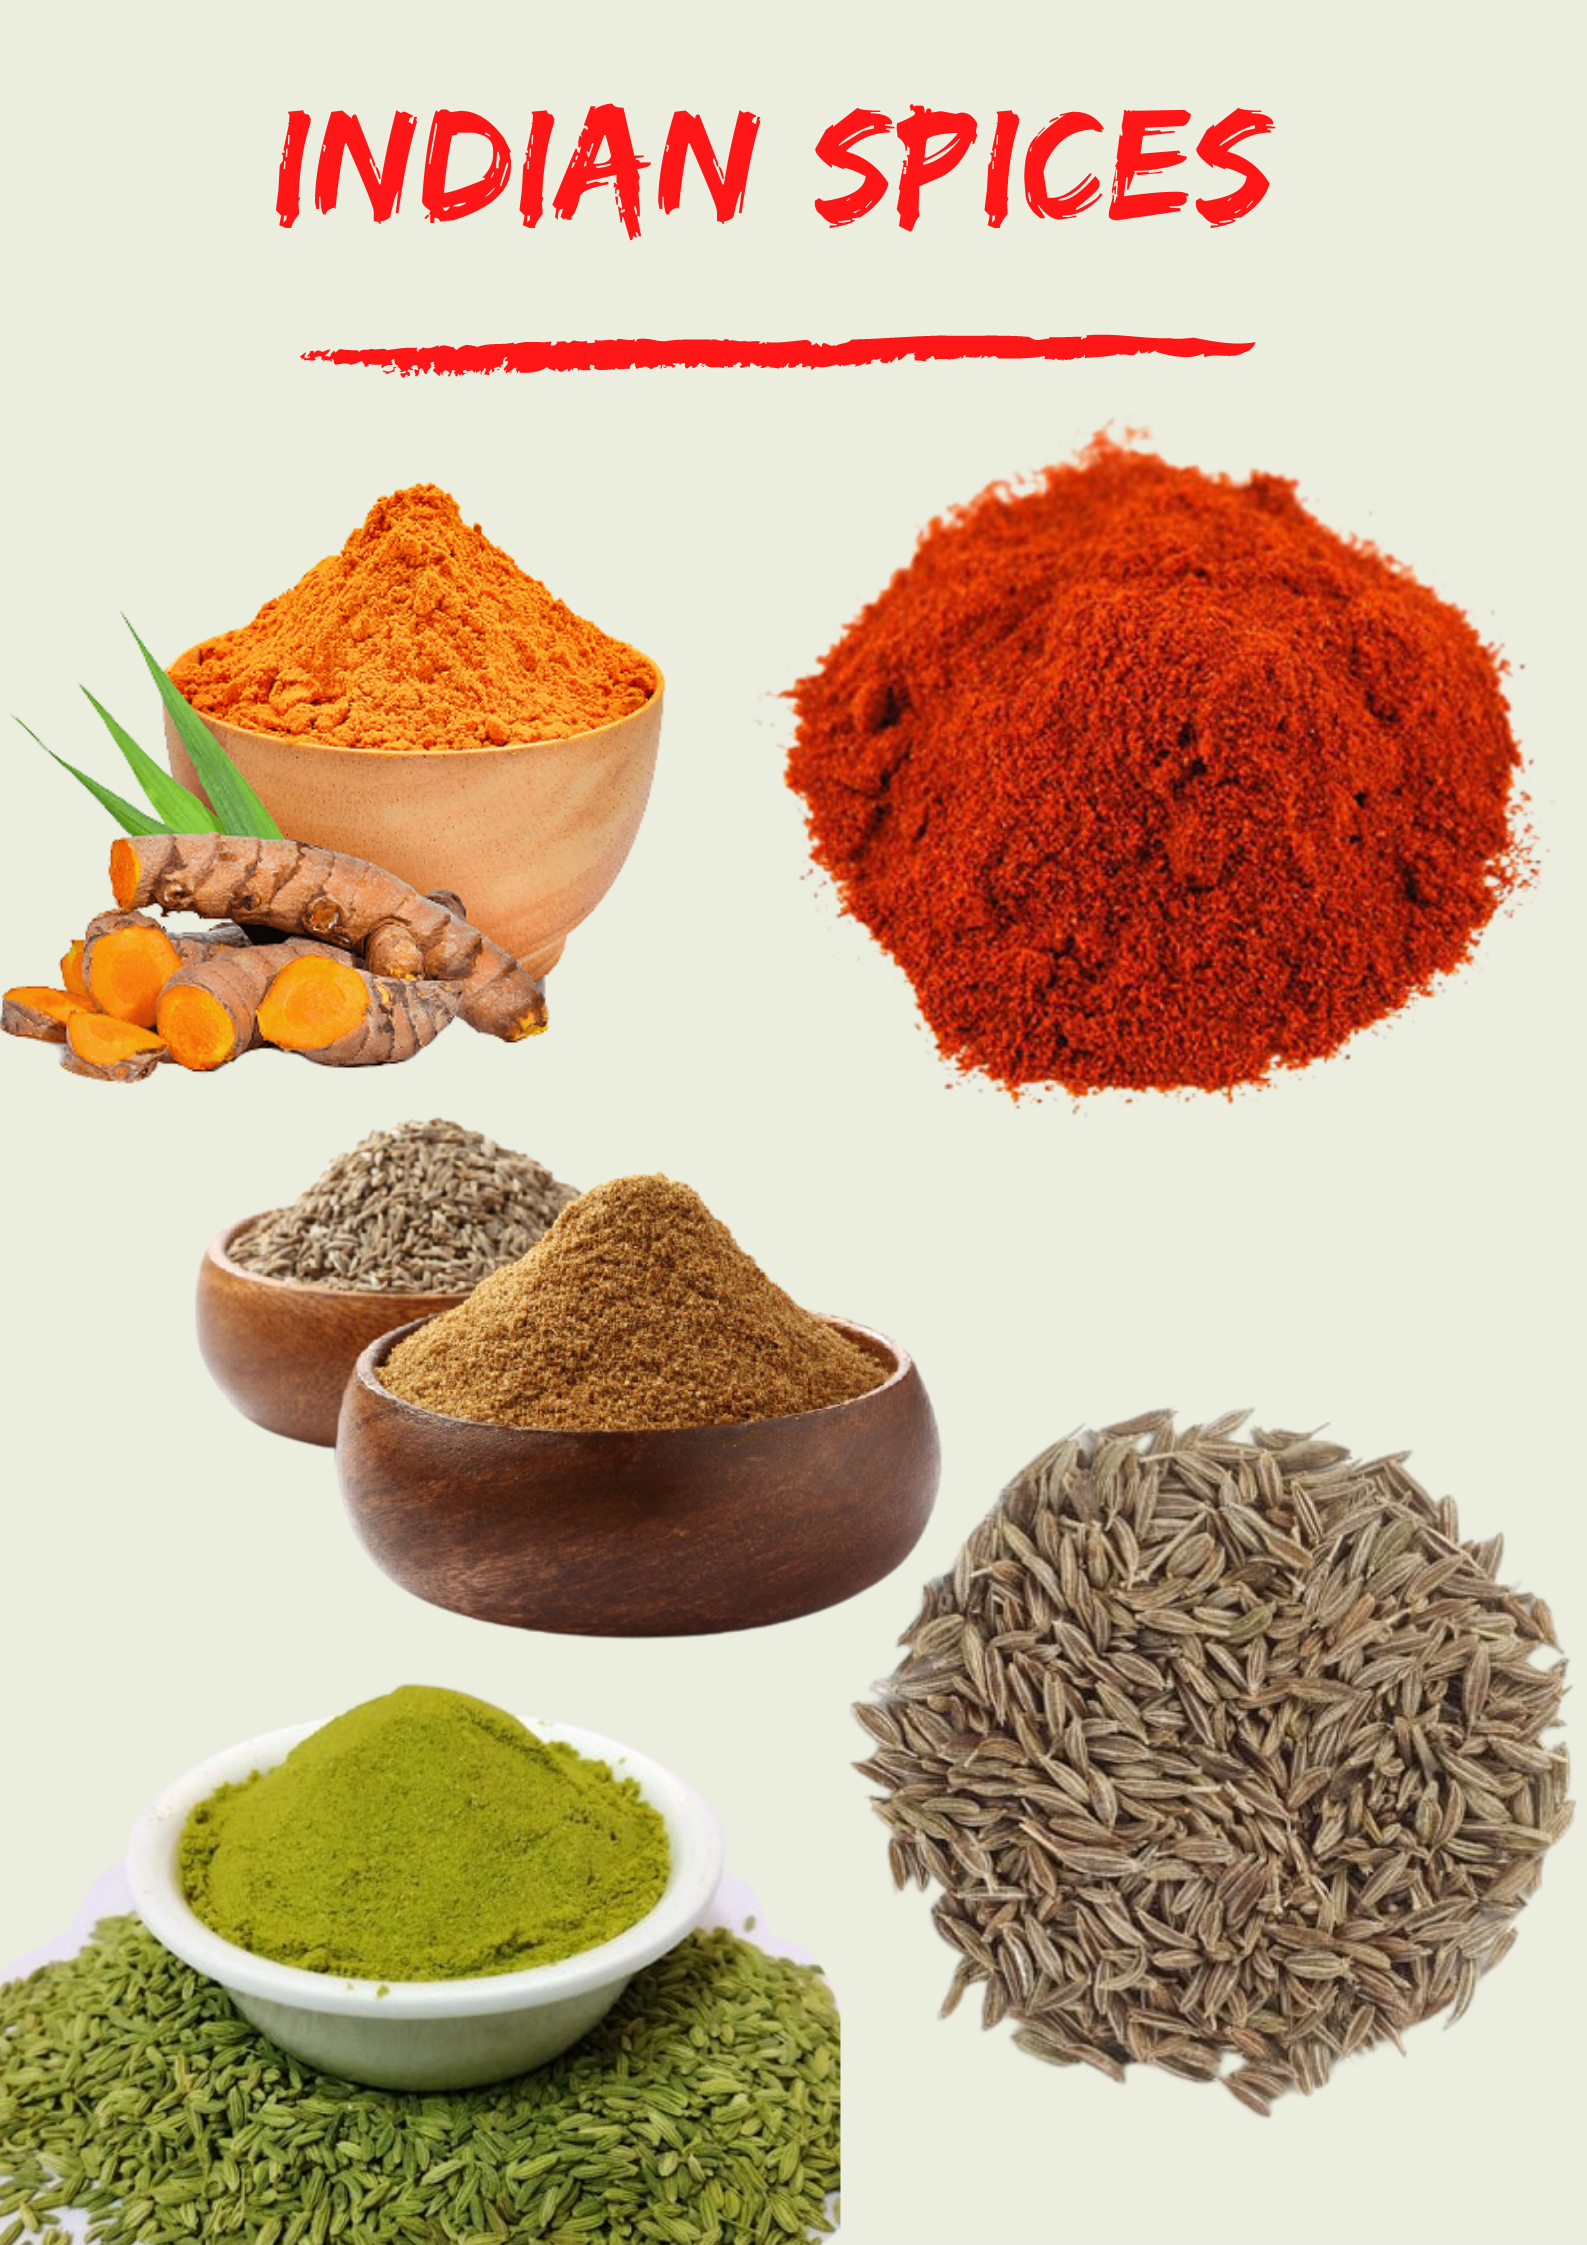 Global Exporter of Indian Spices | Vyom Overseas